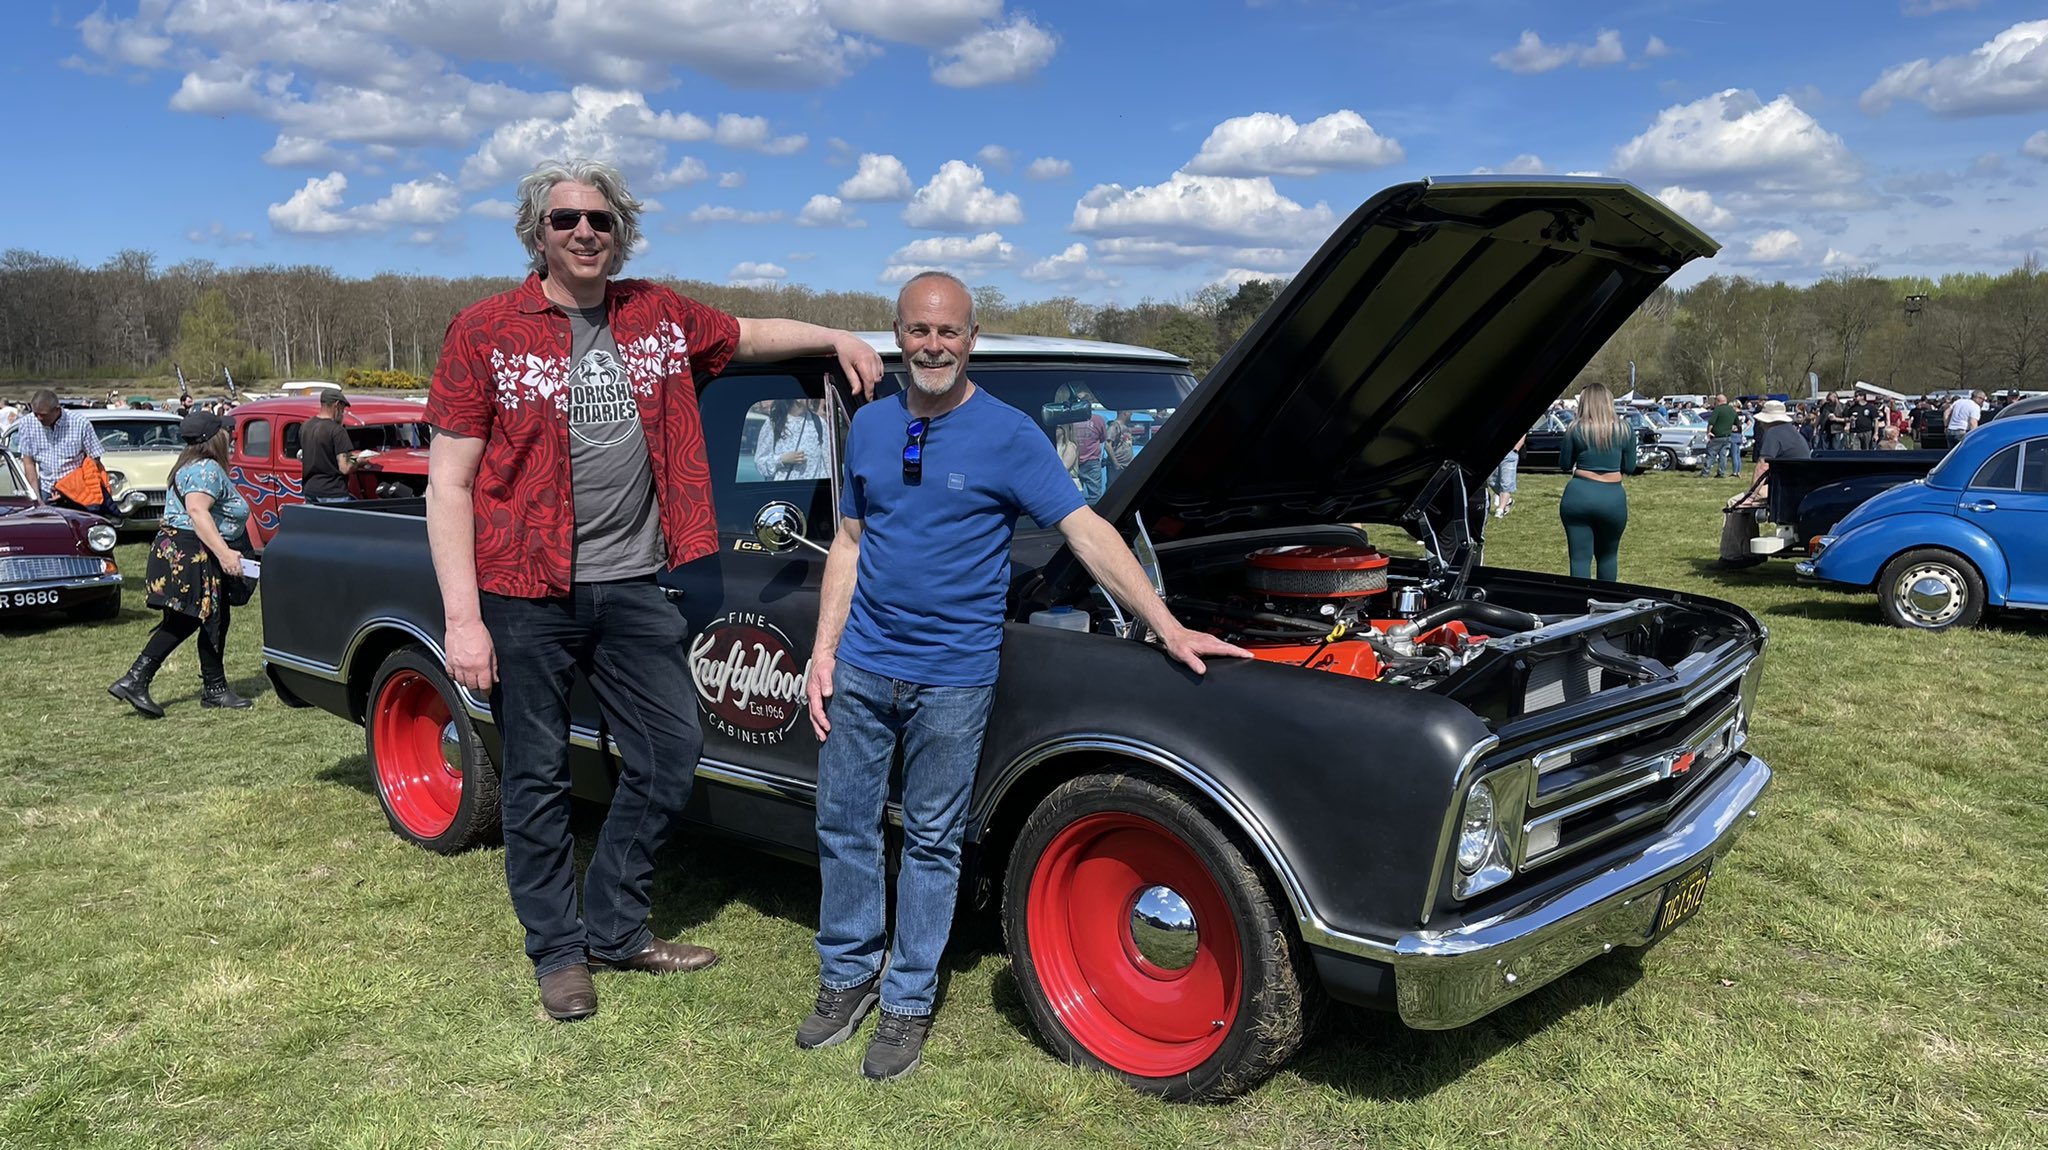 Edd China downs tools to join aid mission to Ukraine